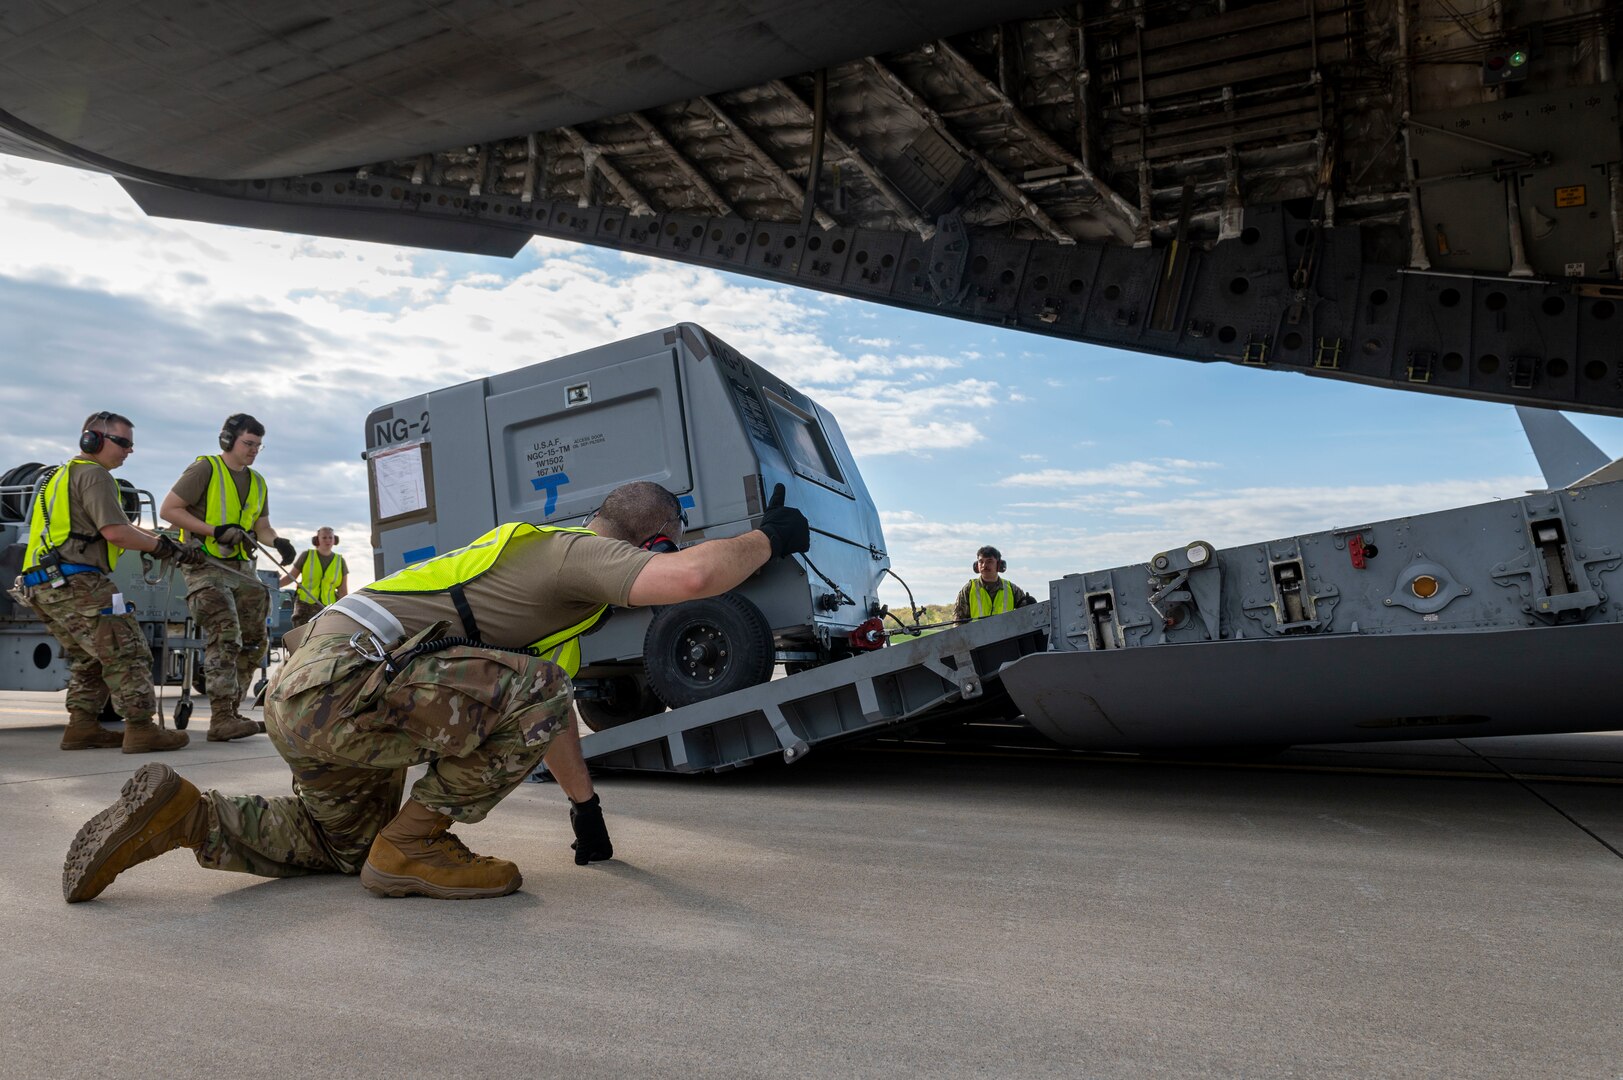 a man kneels on the ground as he watches a piece of equipment go up a ramp